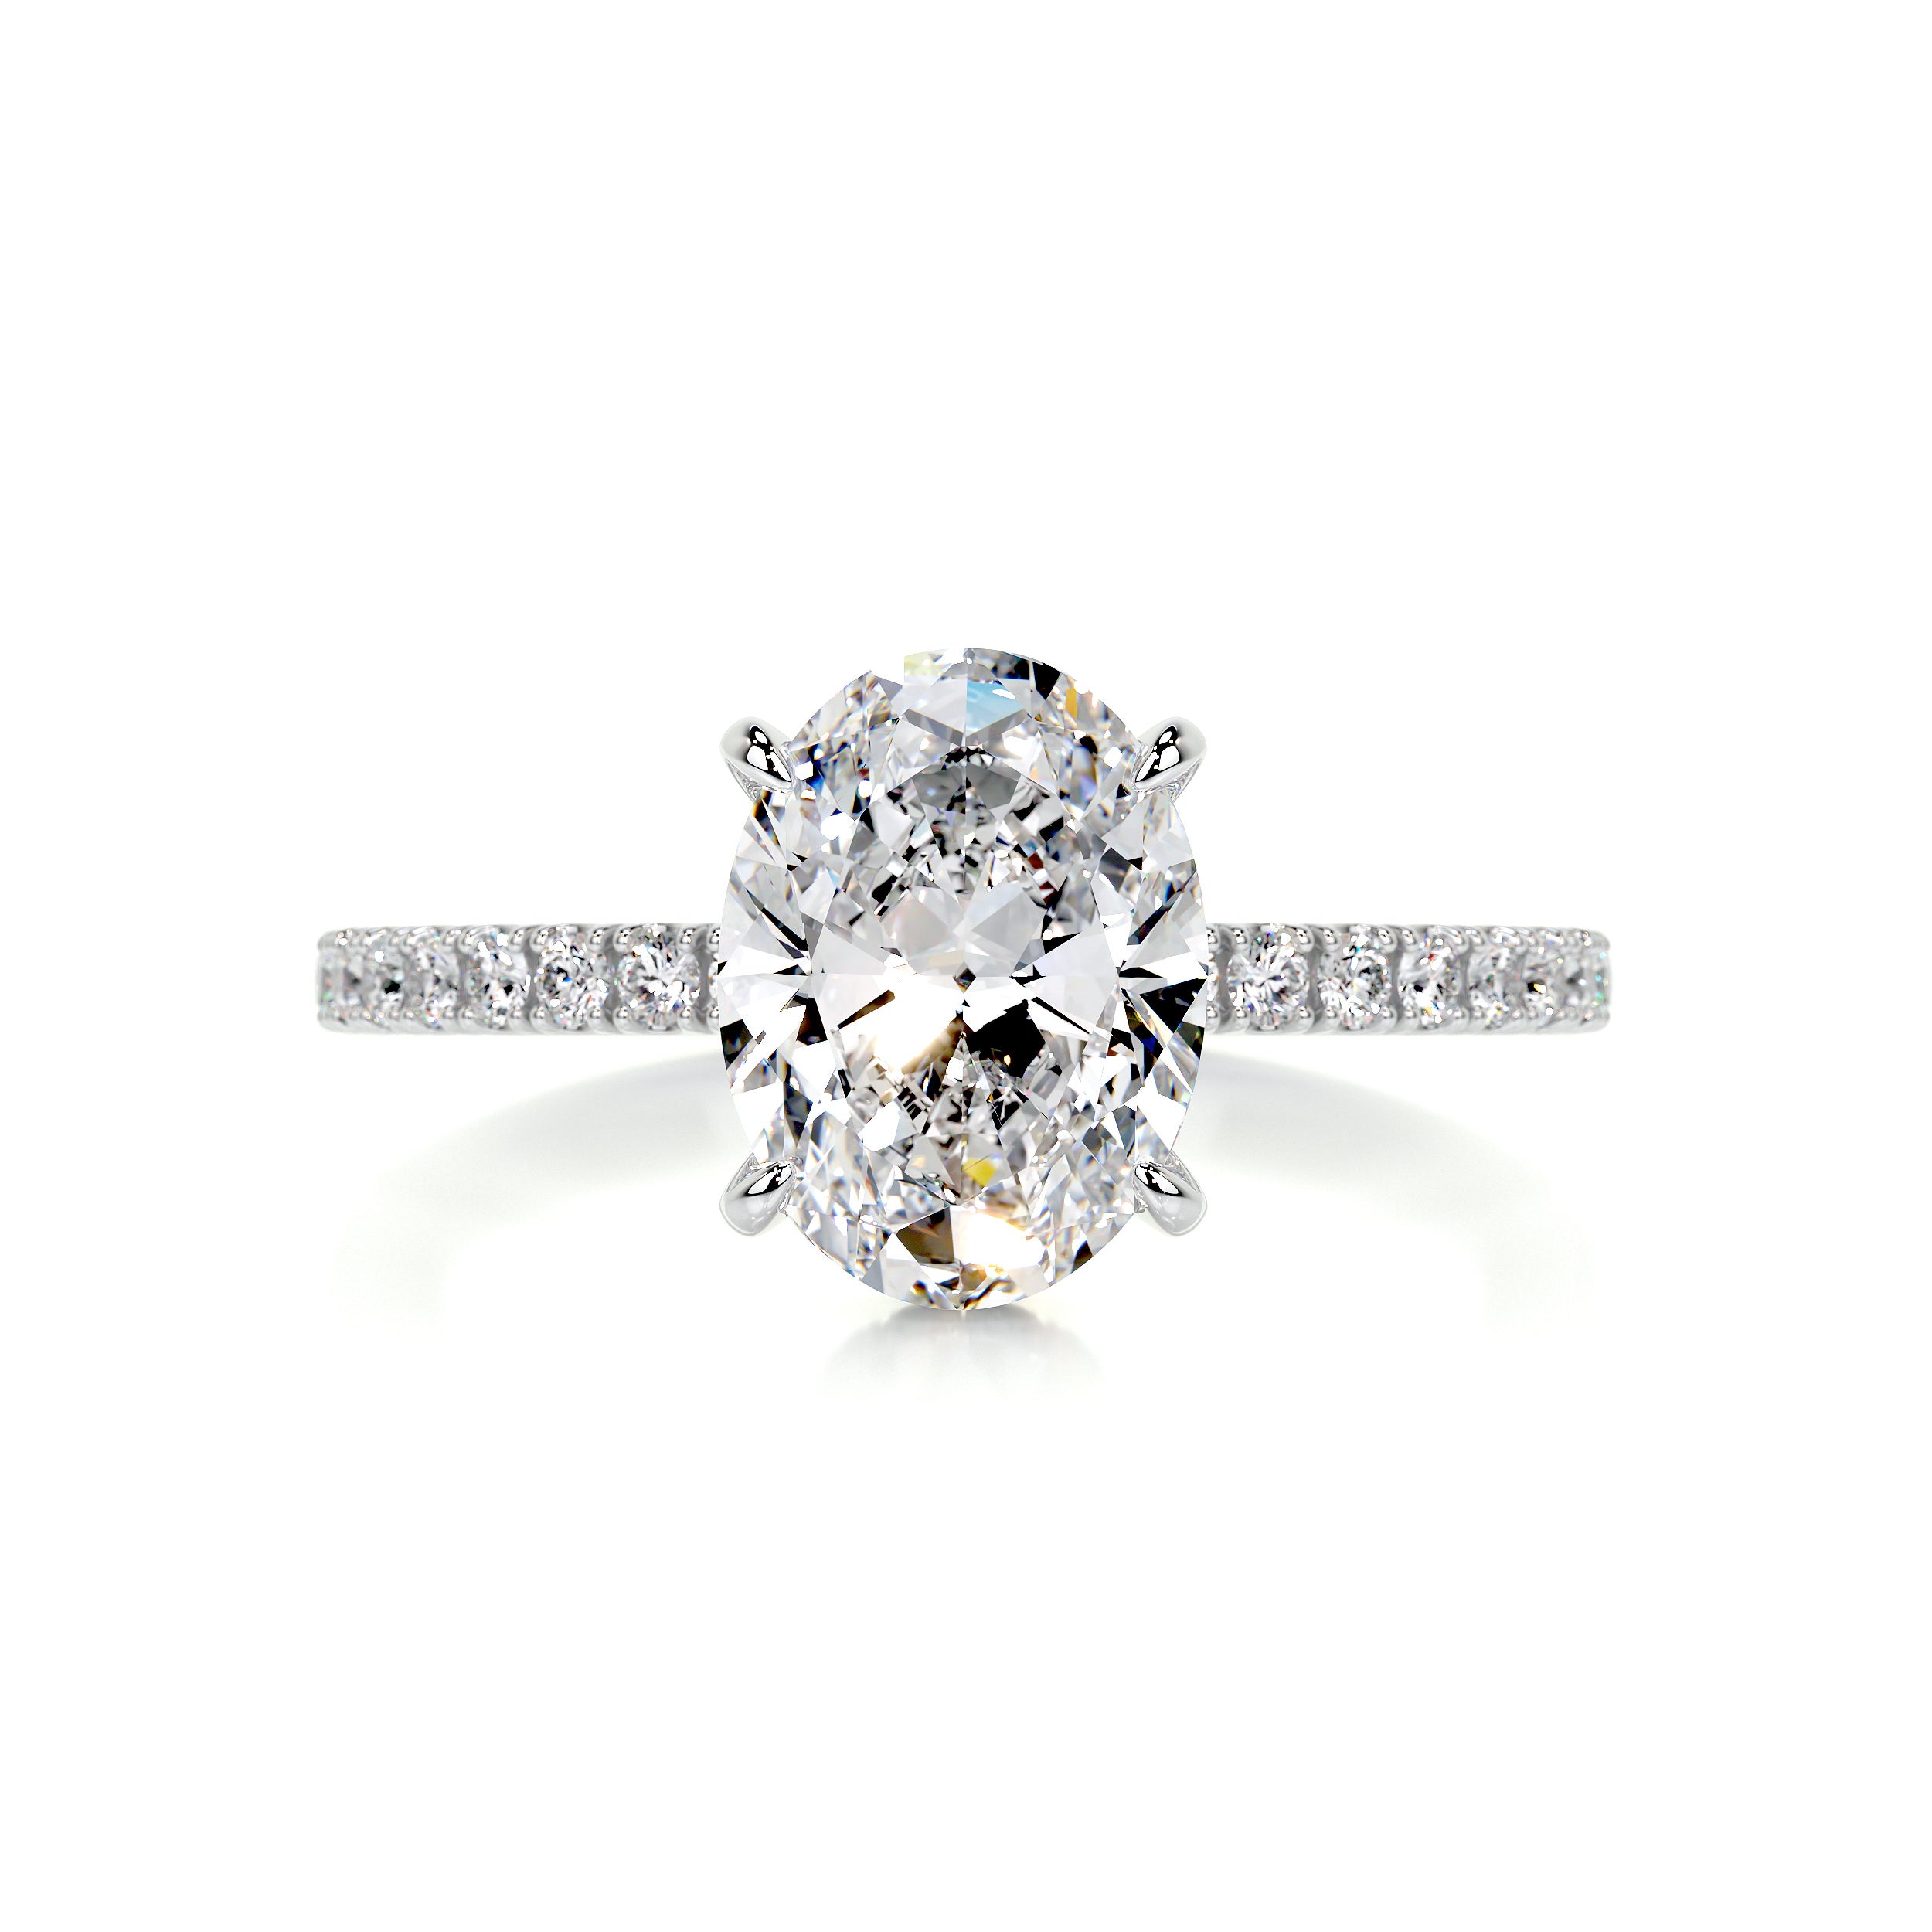 Lucy Diamond Engagement Ring